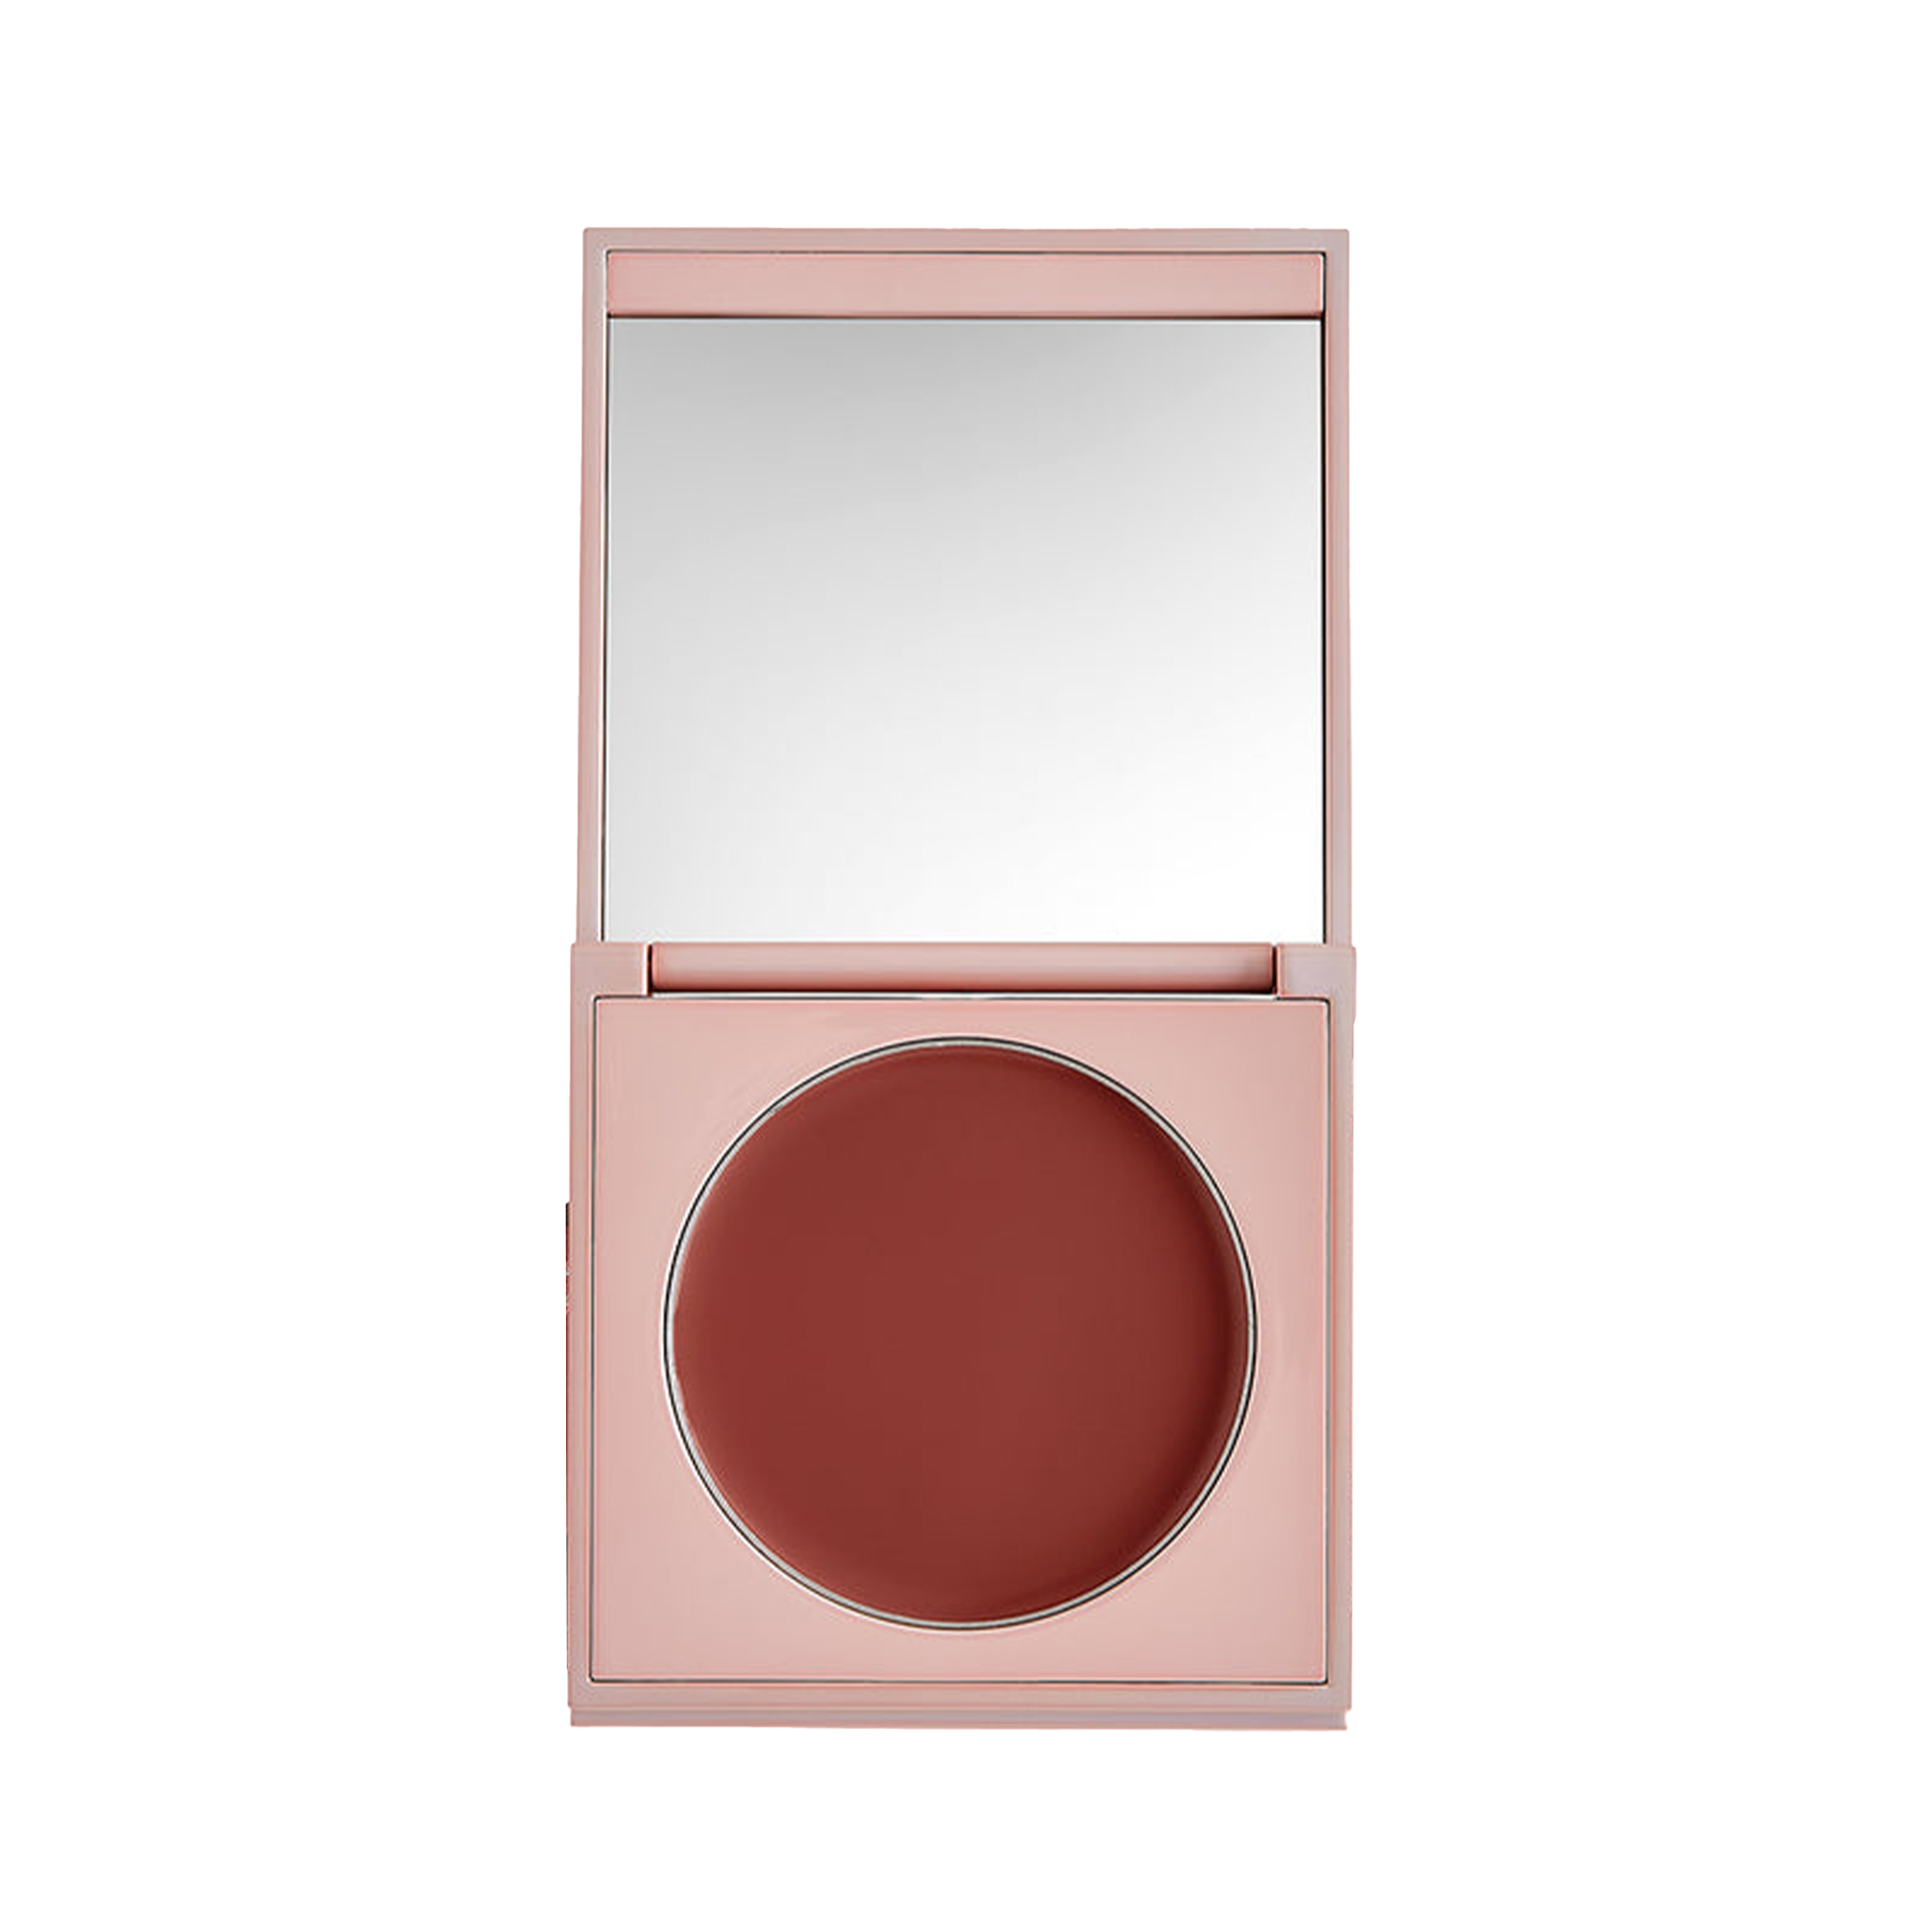 Load image into Gallery viewer, Sigma Beauty Cream Blush
